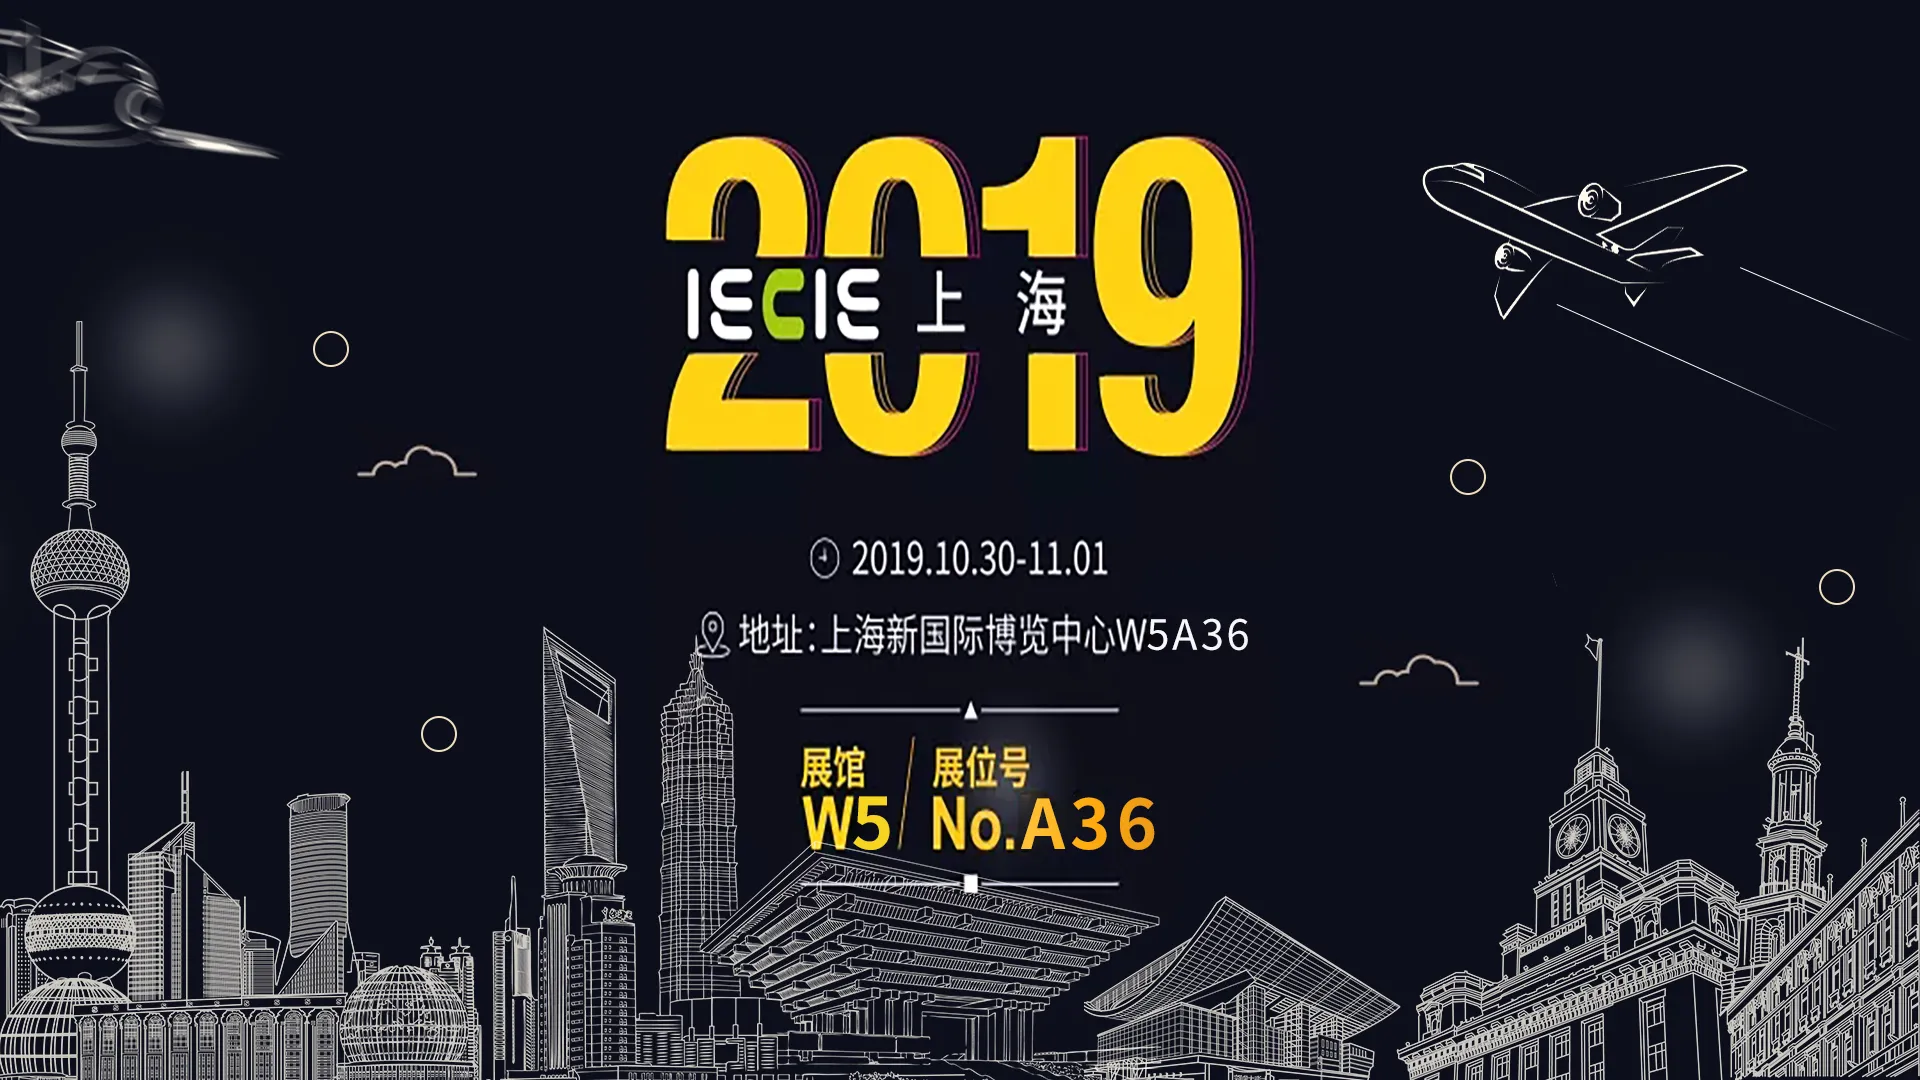 Zinwi Biotech teams up with IECIE to unveil a heavyweight new e-liquid product at the 2019 Shanghai Vape Culture Week exhibition.